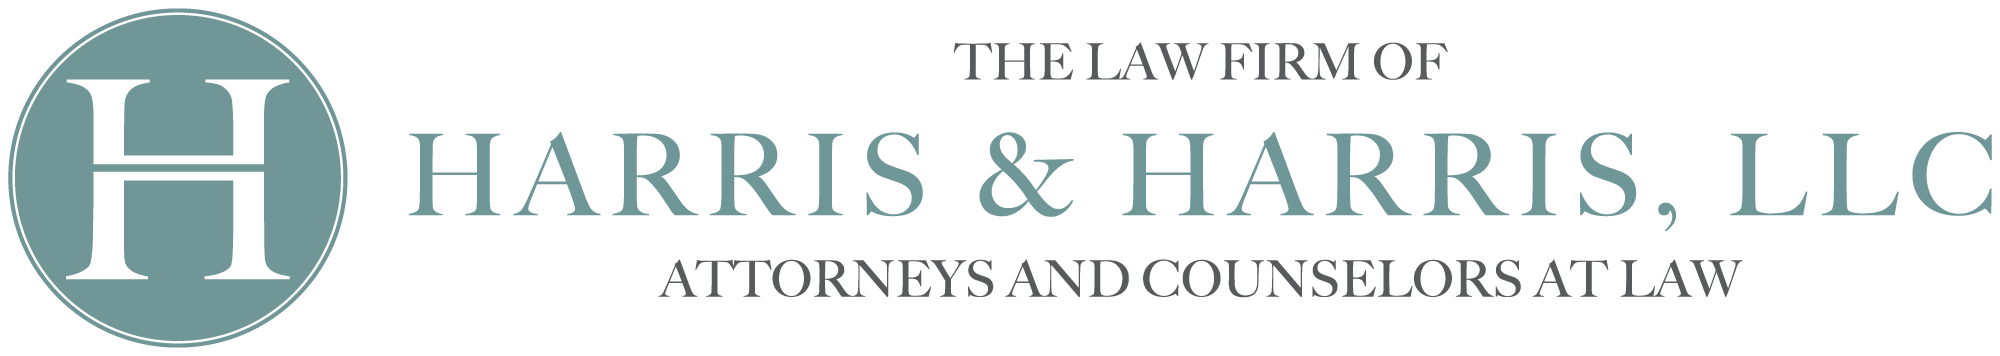 The Law Firm of Harris & Harris